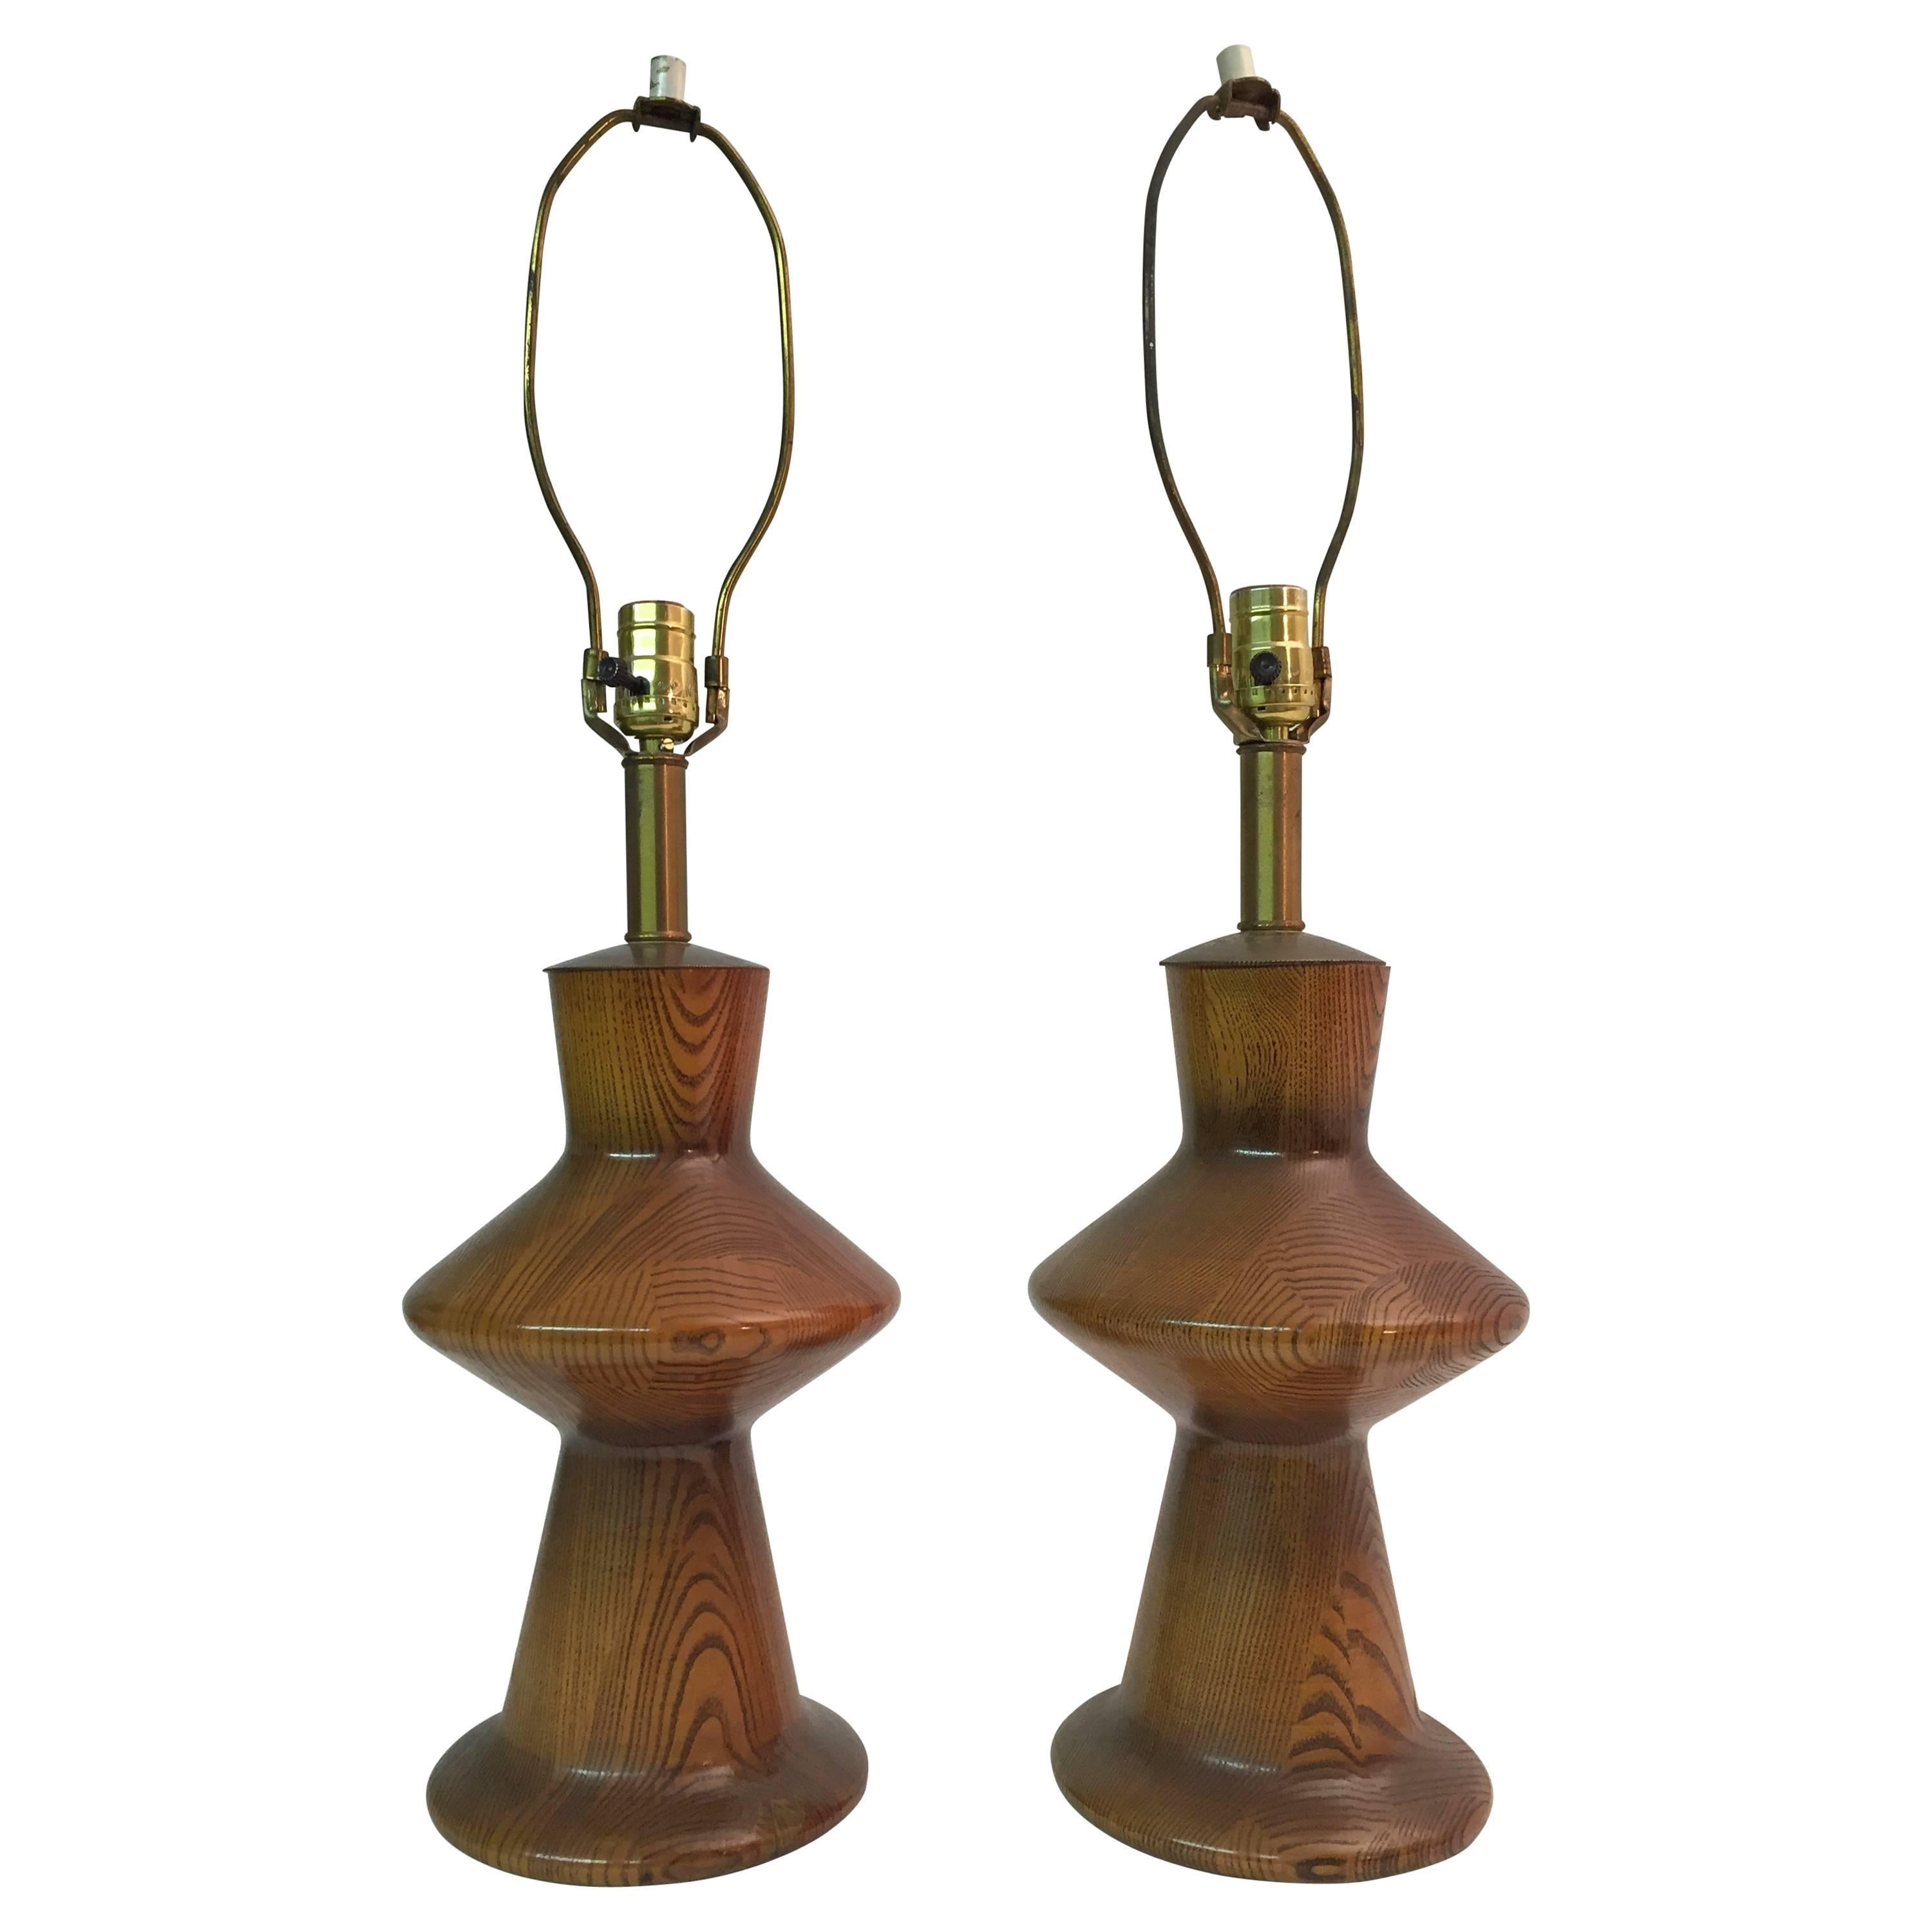 Pair of Modernist Turned Oak Table Lamps in the Manner of Jacques Grange